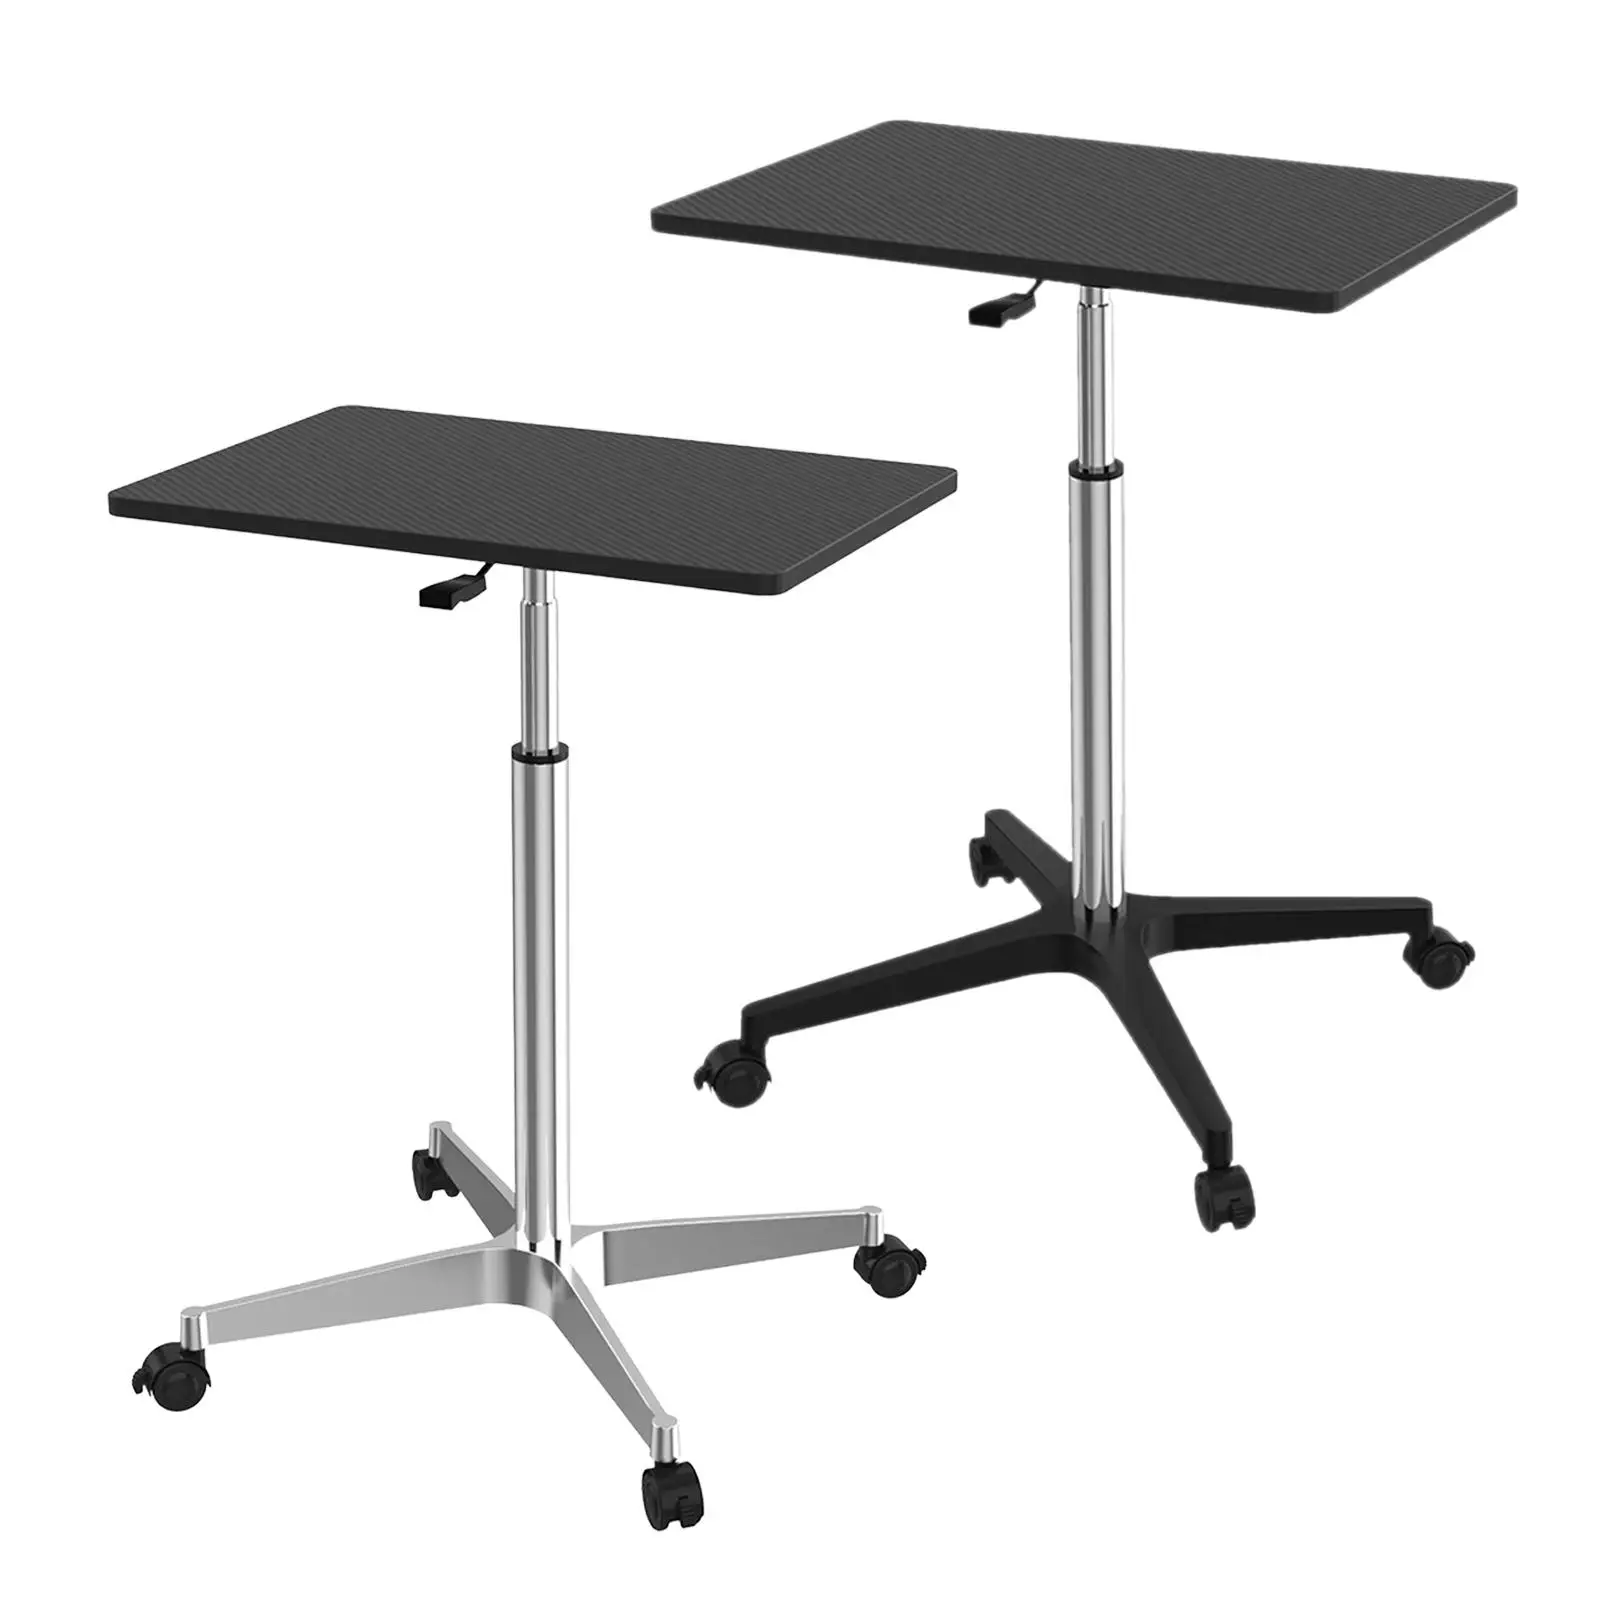 Adjustable Rolling Desk Laptop Standing Desk for Home Office Computer Desk Stand with Lockable Wheels Work Table Durable